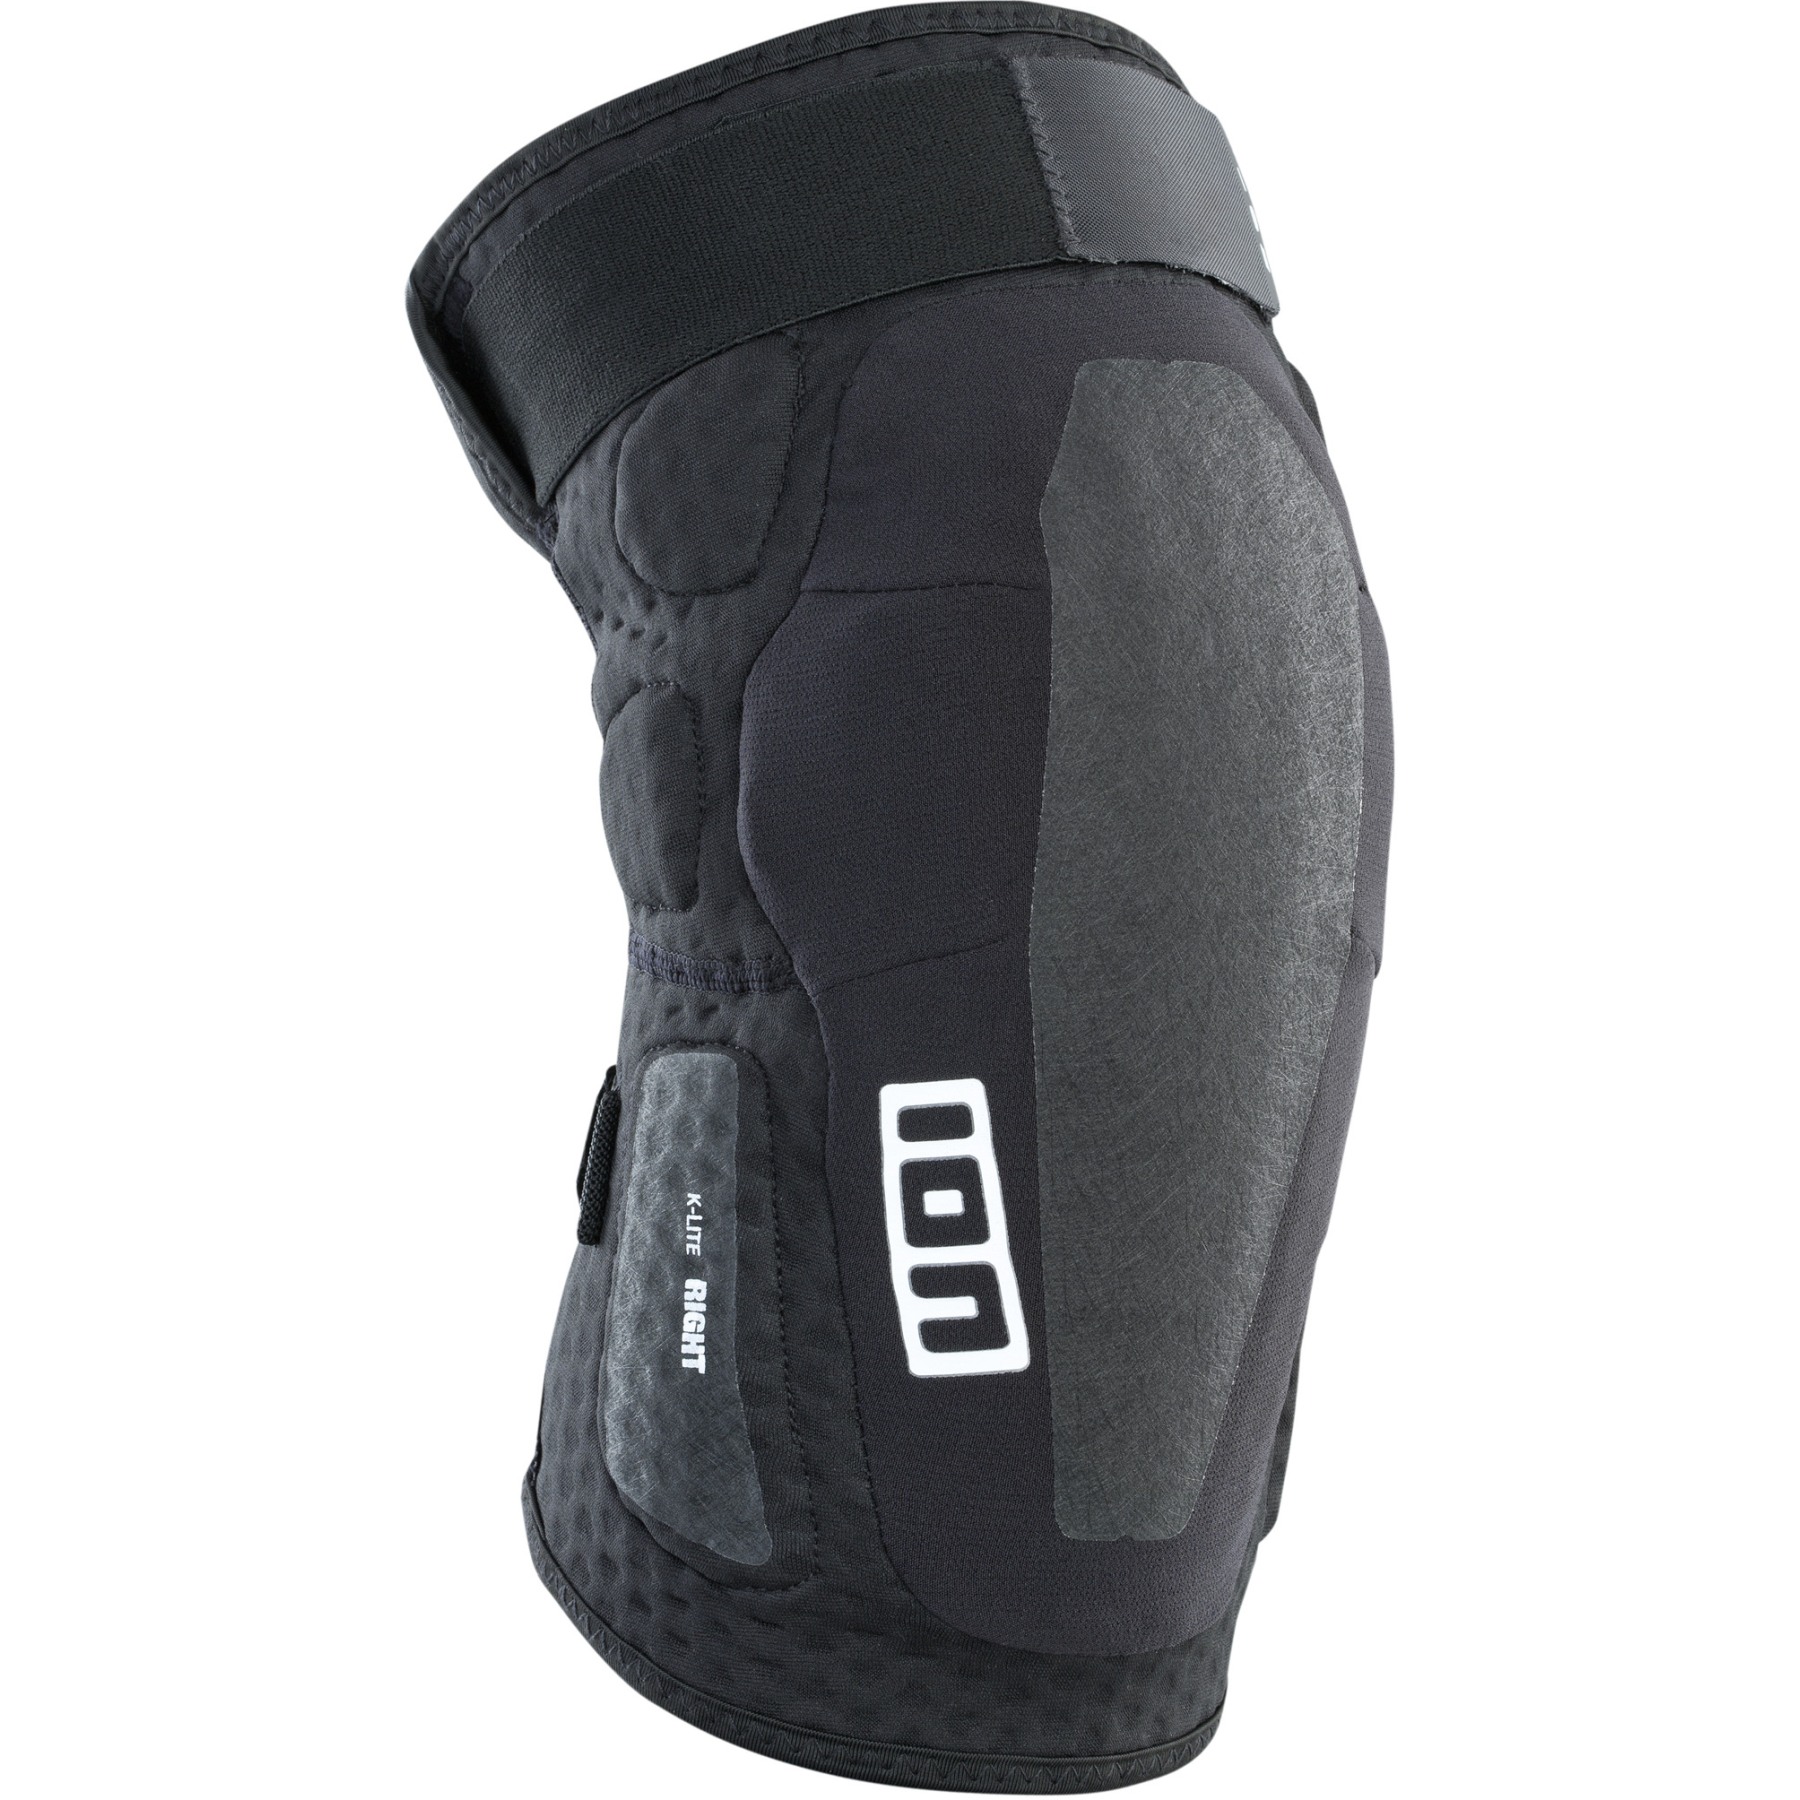 Picture of ION Bike Protection K-Lite Knee Guards - Black